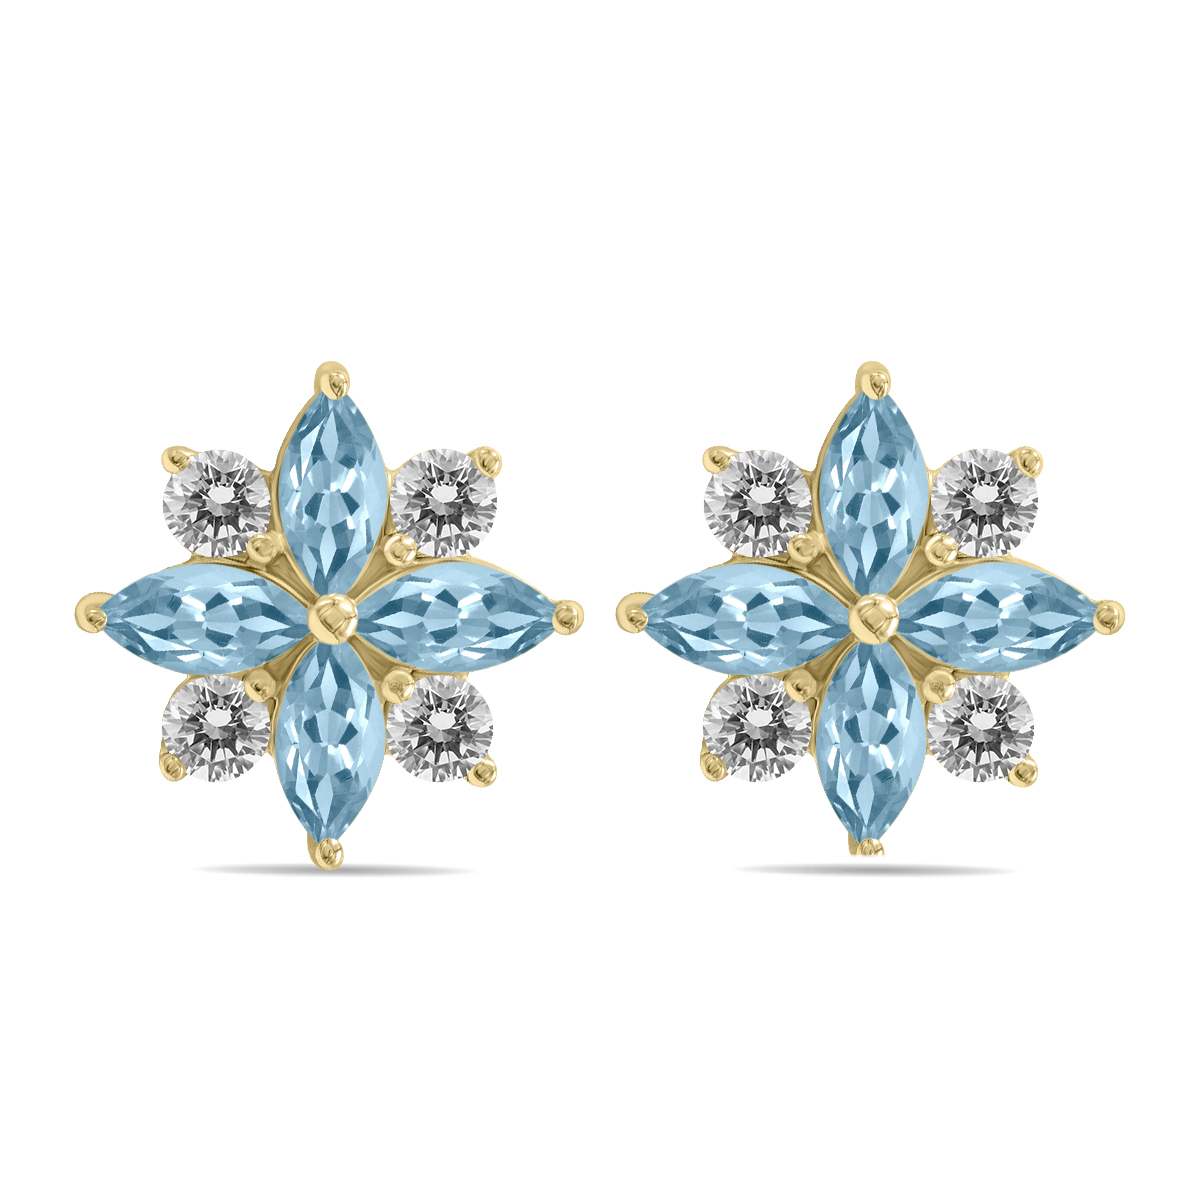 Image of 1 Carat TW Aquamarine and Diamond Flower Earrings in 10K Yellow Gold